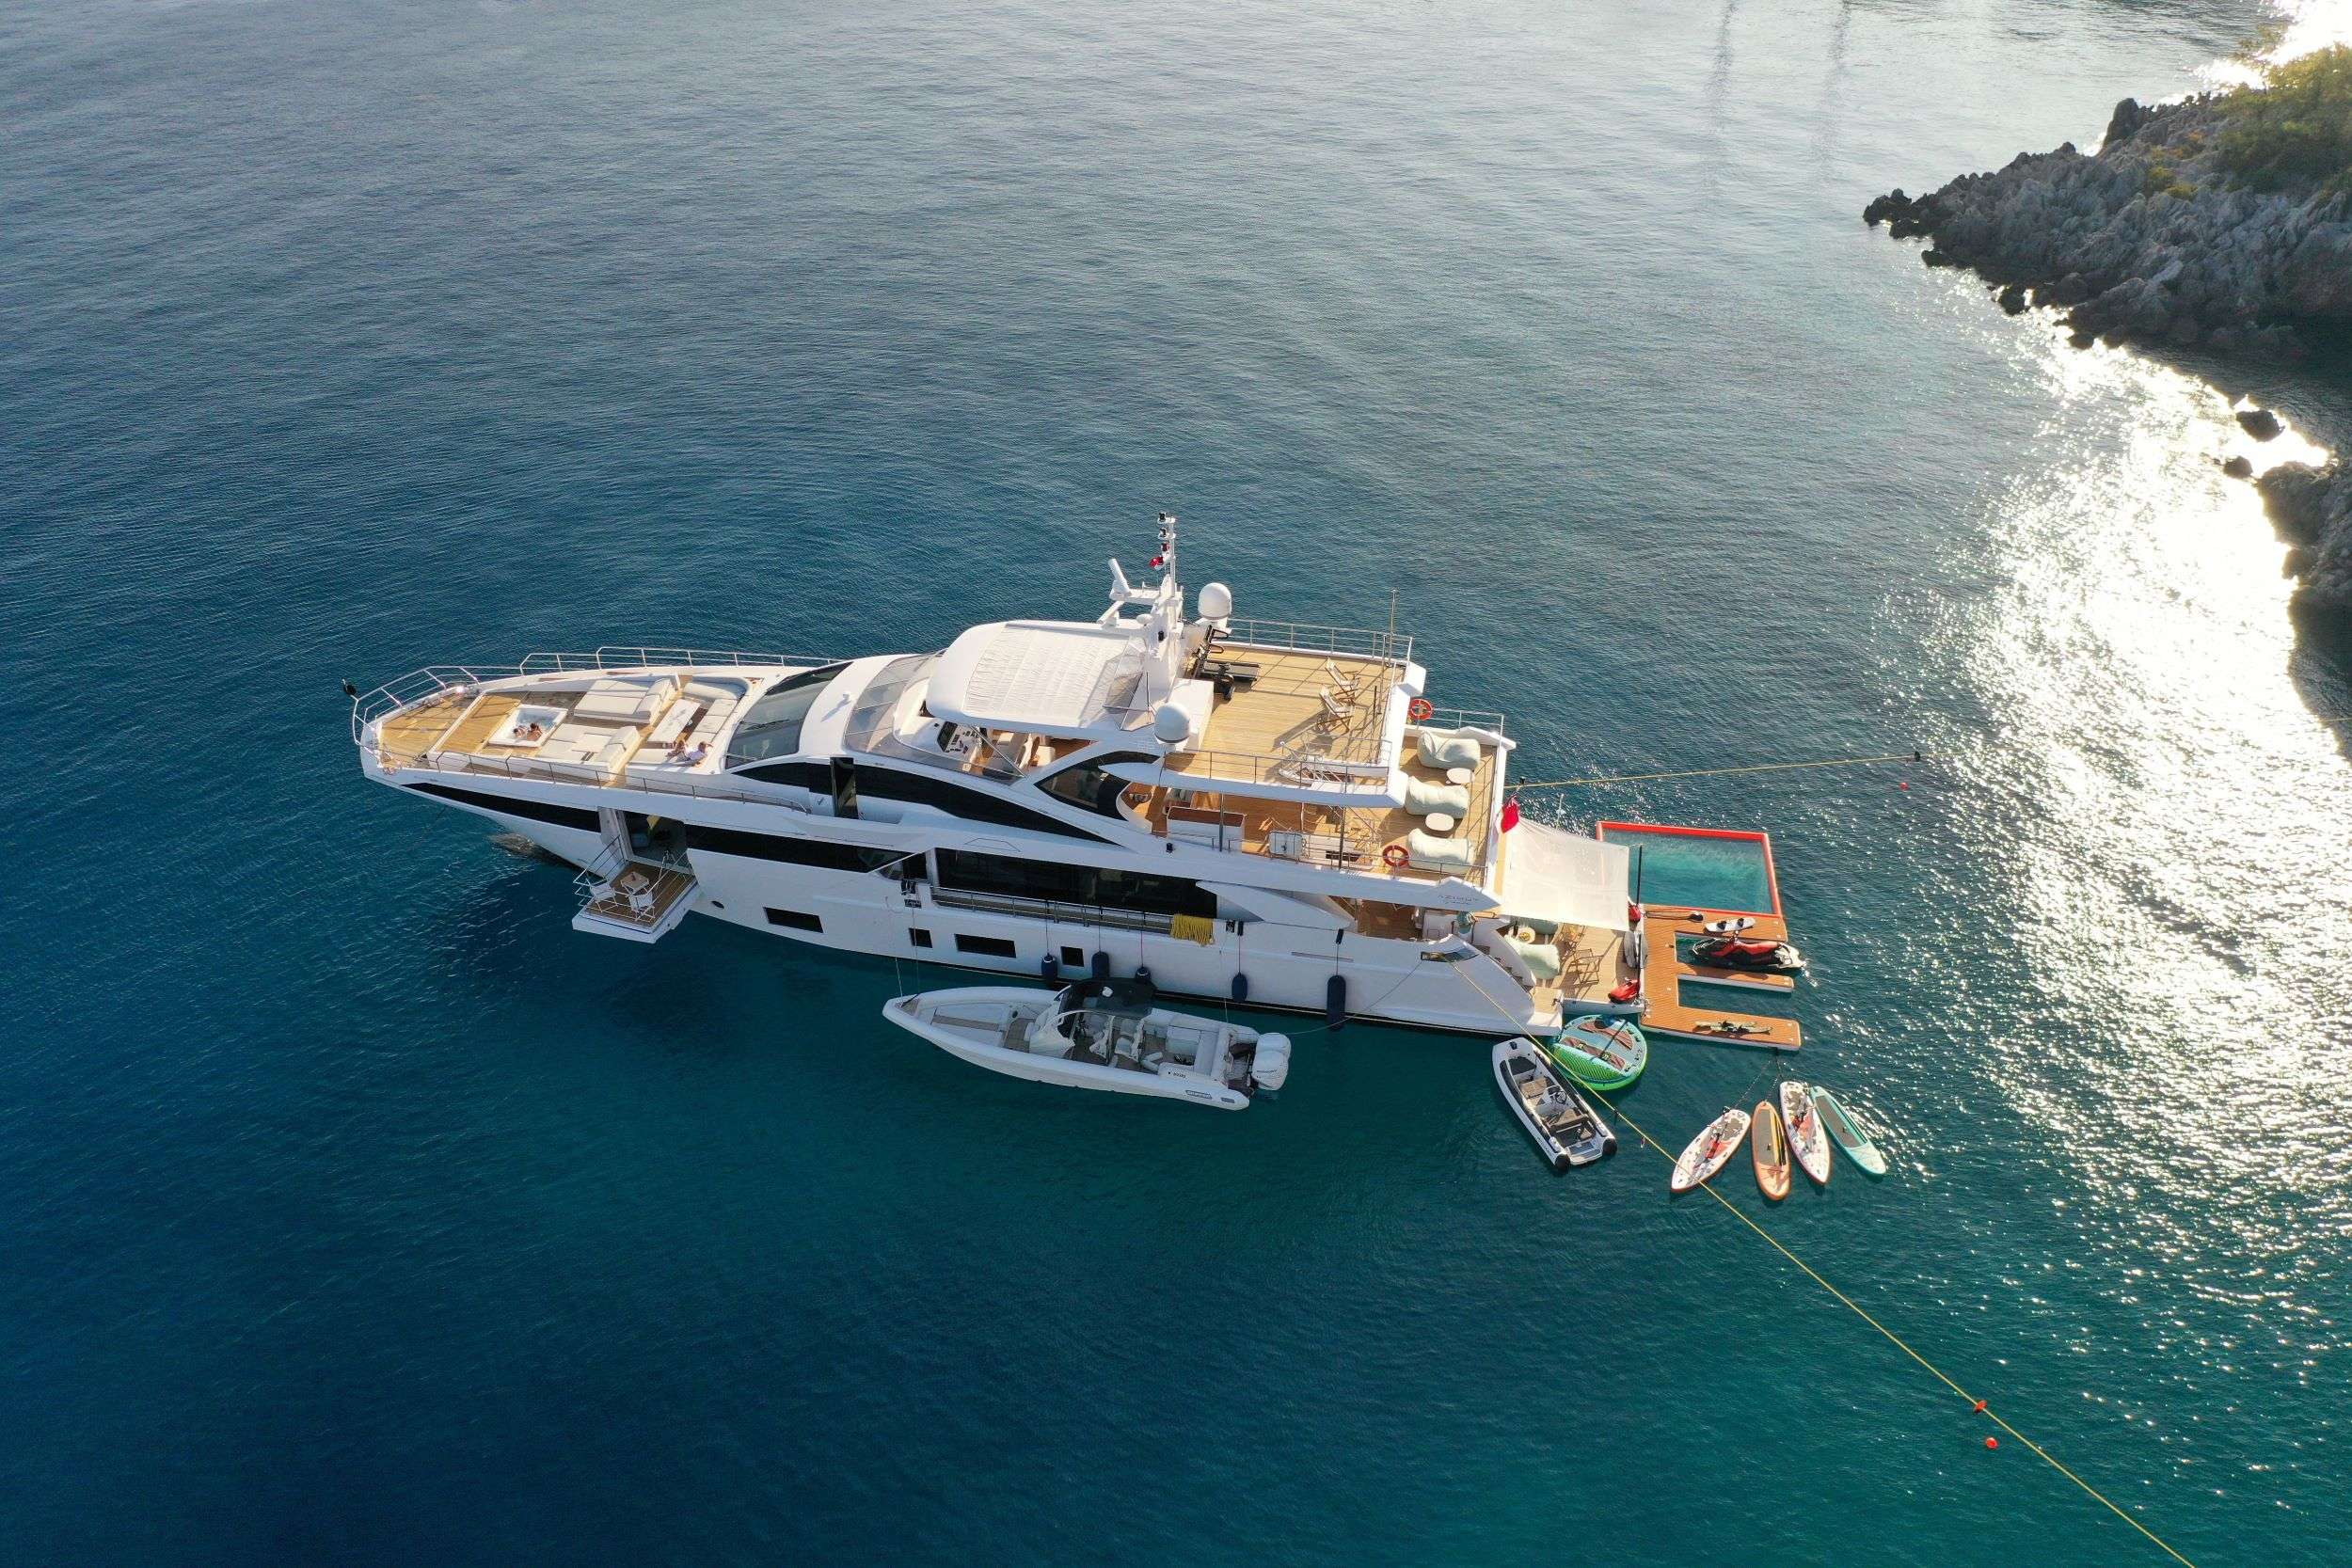 LOVE T - Yacht Charter Ragusa & Boat hire in Summer: Greece | Winter: W. Med -Naples/Sicily 1